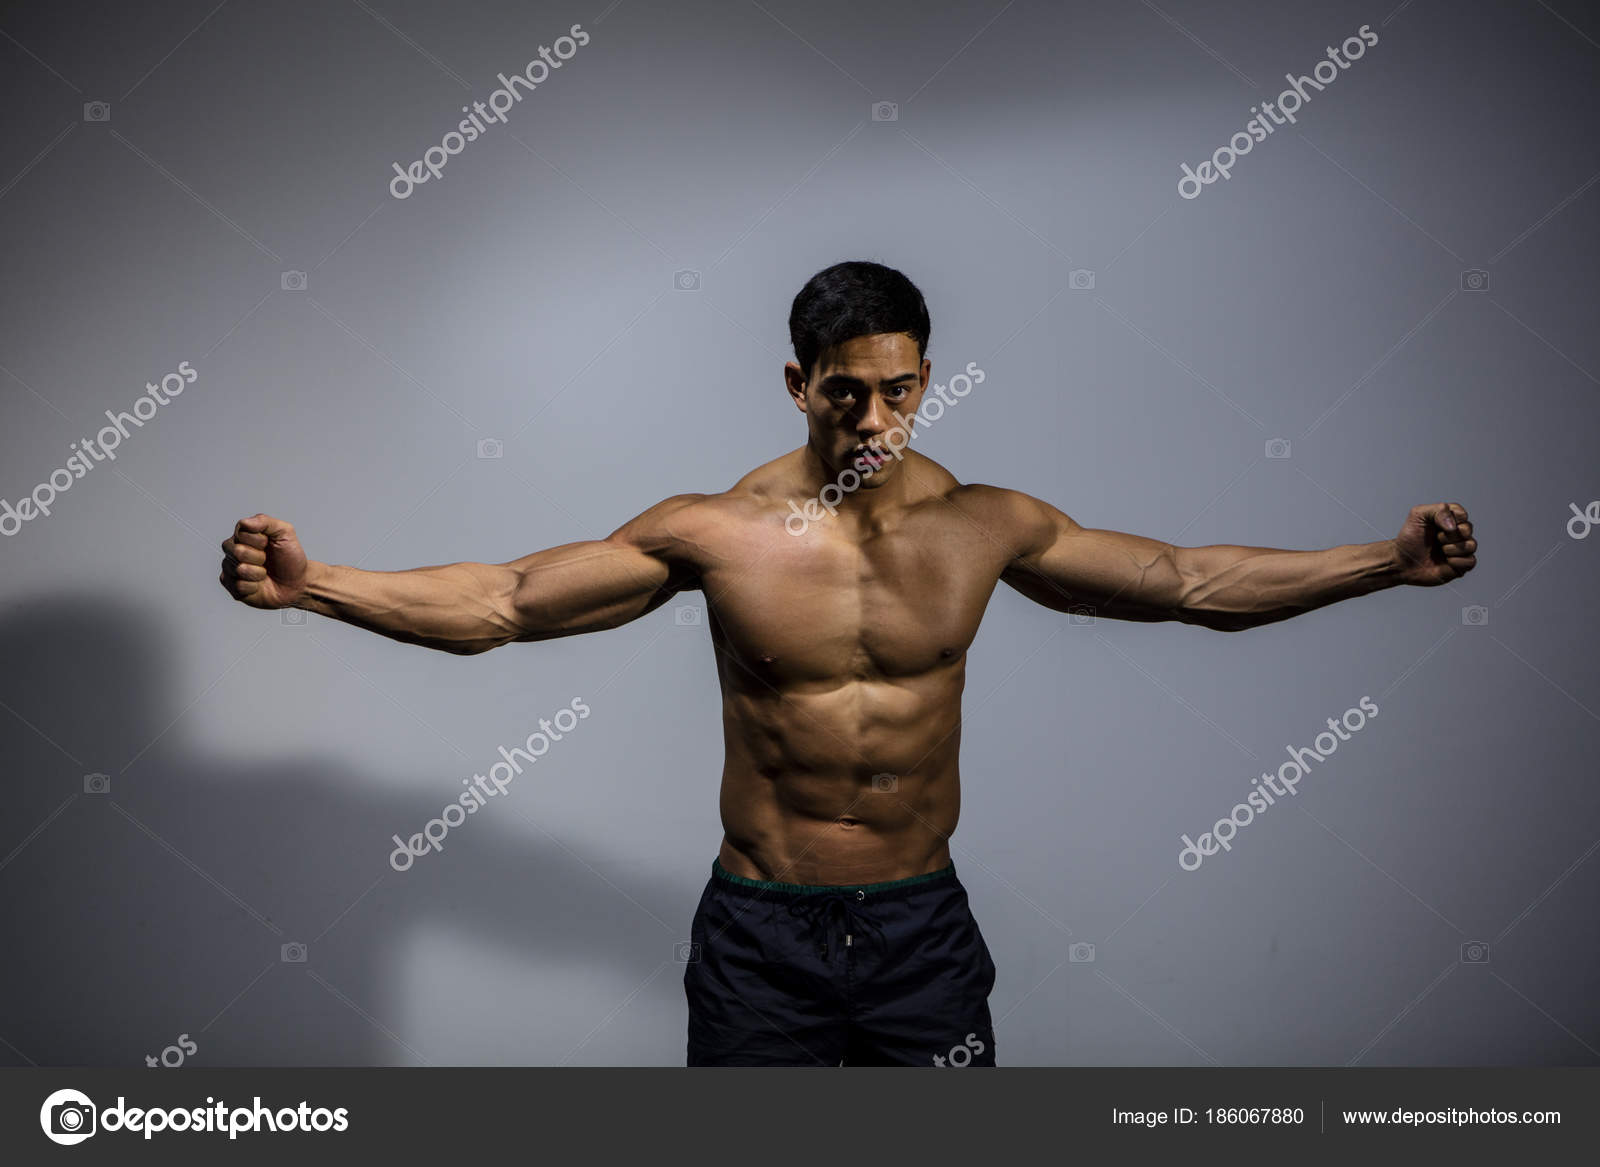 Fitness Model Displaying Biceps and Pectorals With Stretched Out